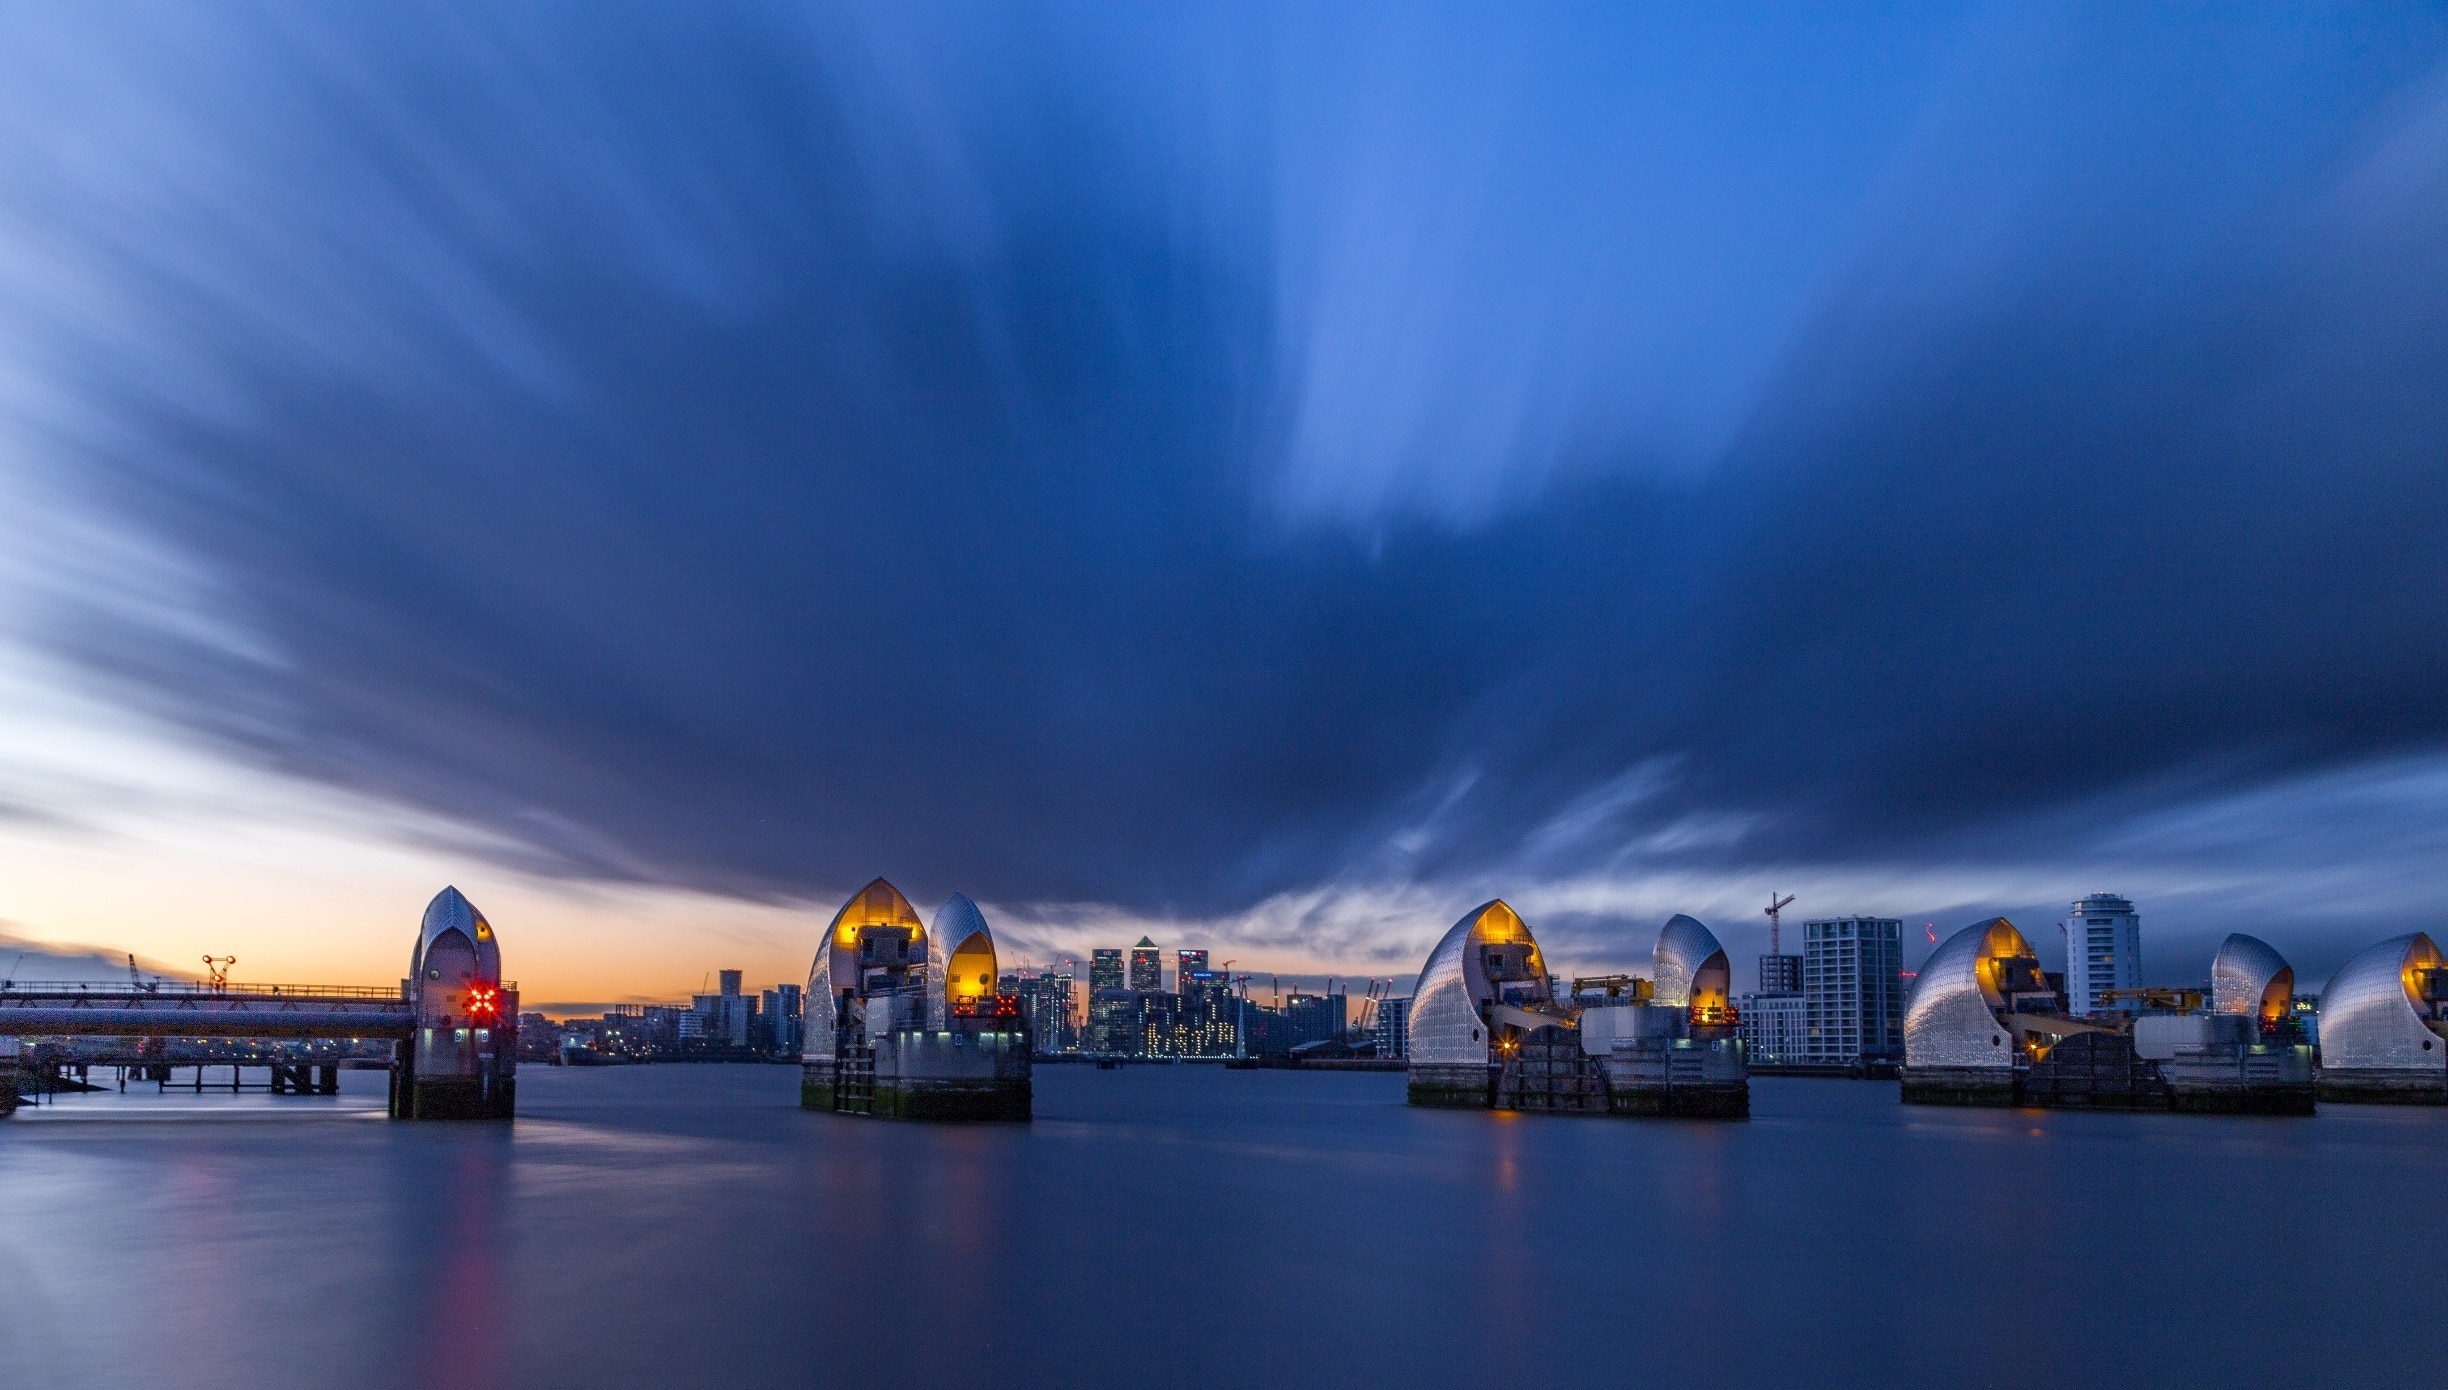 The Thames Barrier from the eastern side by the Viewpoint Cafe, with Canary Wharf in the background.

Although last night was pretty windy and chilly, the light was pretty nice with big clouds moving in the sky.

I even had the chance (i.e. I did not plan it this way) to get there around when the tide was flipping direction.  The barrier was up when I arrived and they pulled it back when the tide started to go down.